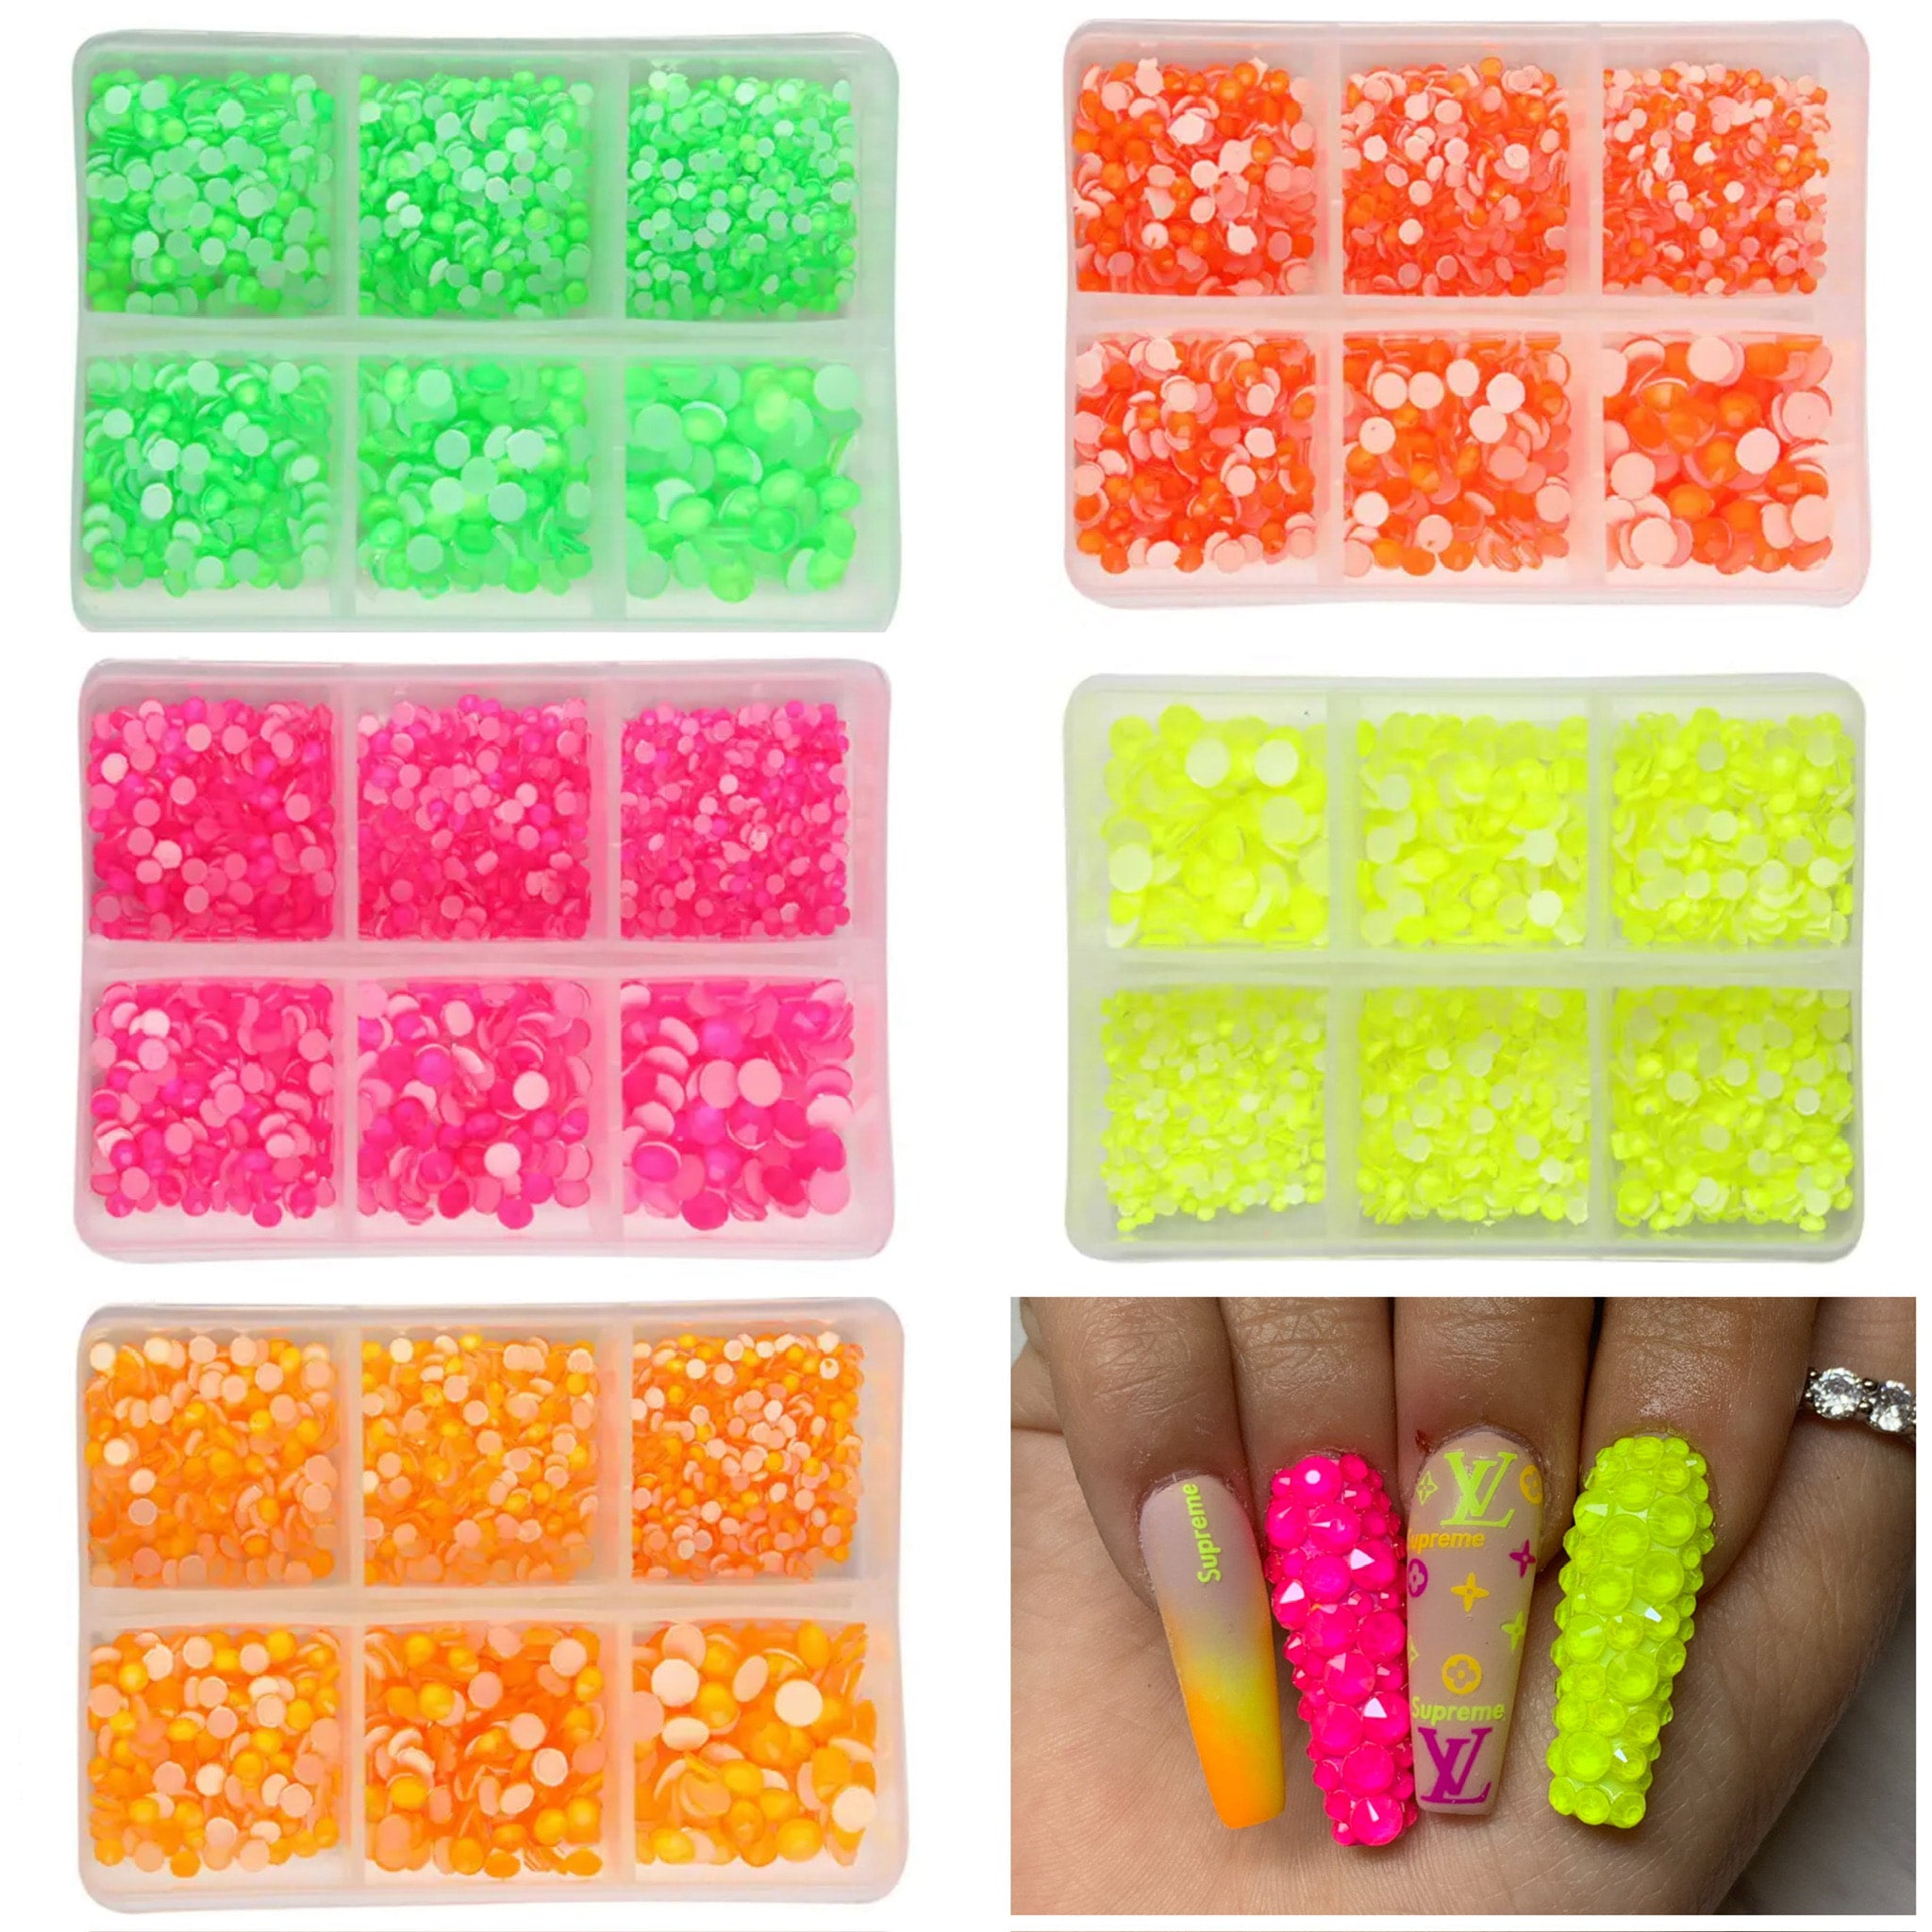 Health & Beauty, Personal Care, Cosmetics, Nail Care, Nail Art Kits and Accessories